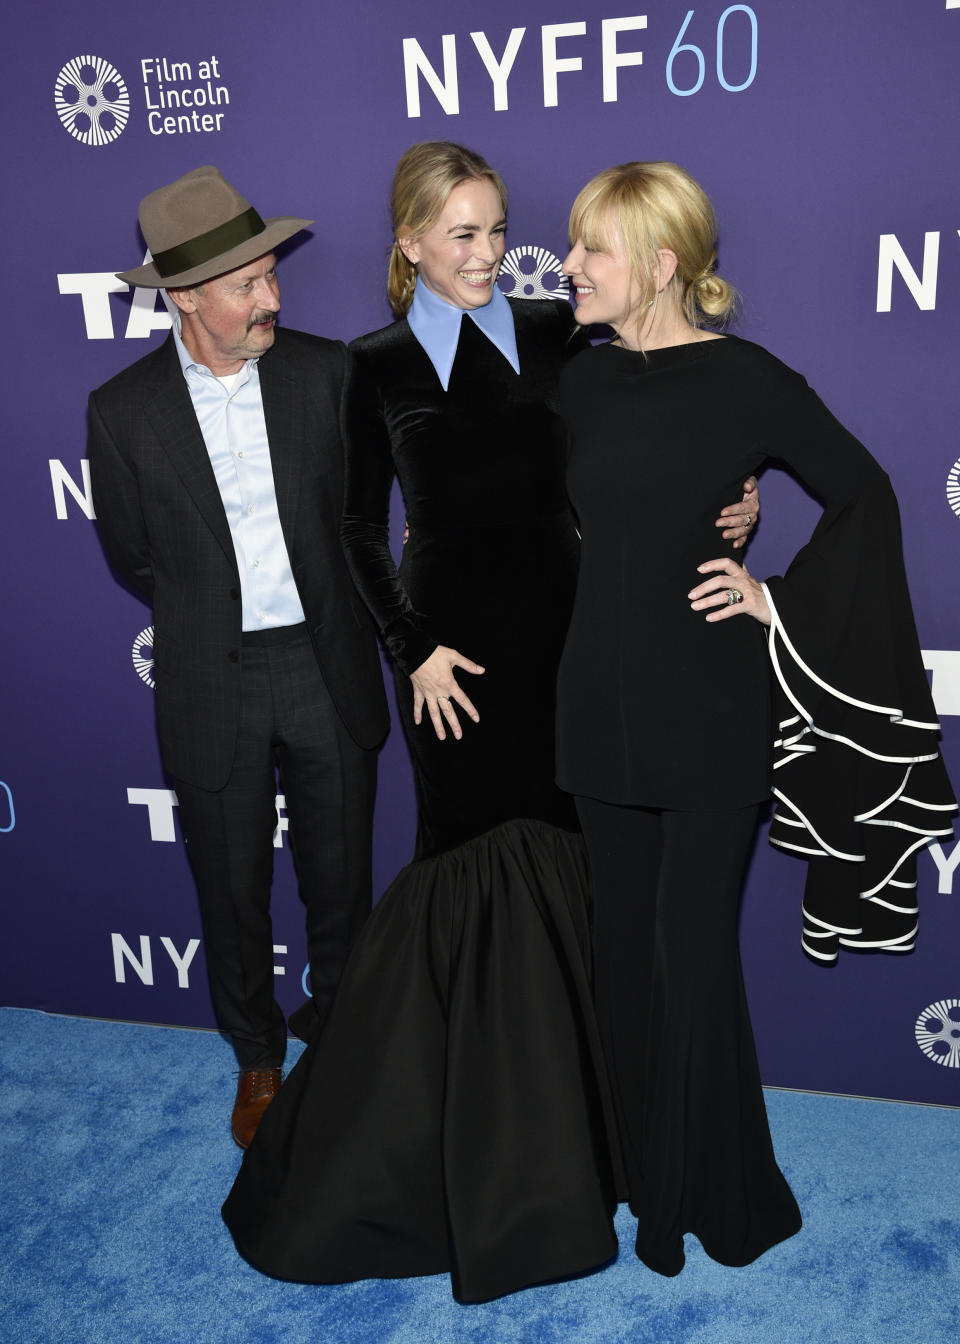 Director Todd Field, left, Nina Hoss and Cate Blanchett attend the premiere of "Tár" at Alice Tully Hall during the 60th New York Film Festival on Monday, Oct. 3, 2022, in New York. (Photo by Evan Agostini/Invision/AP)